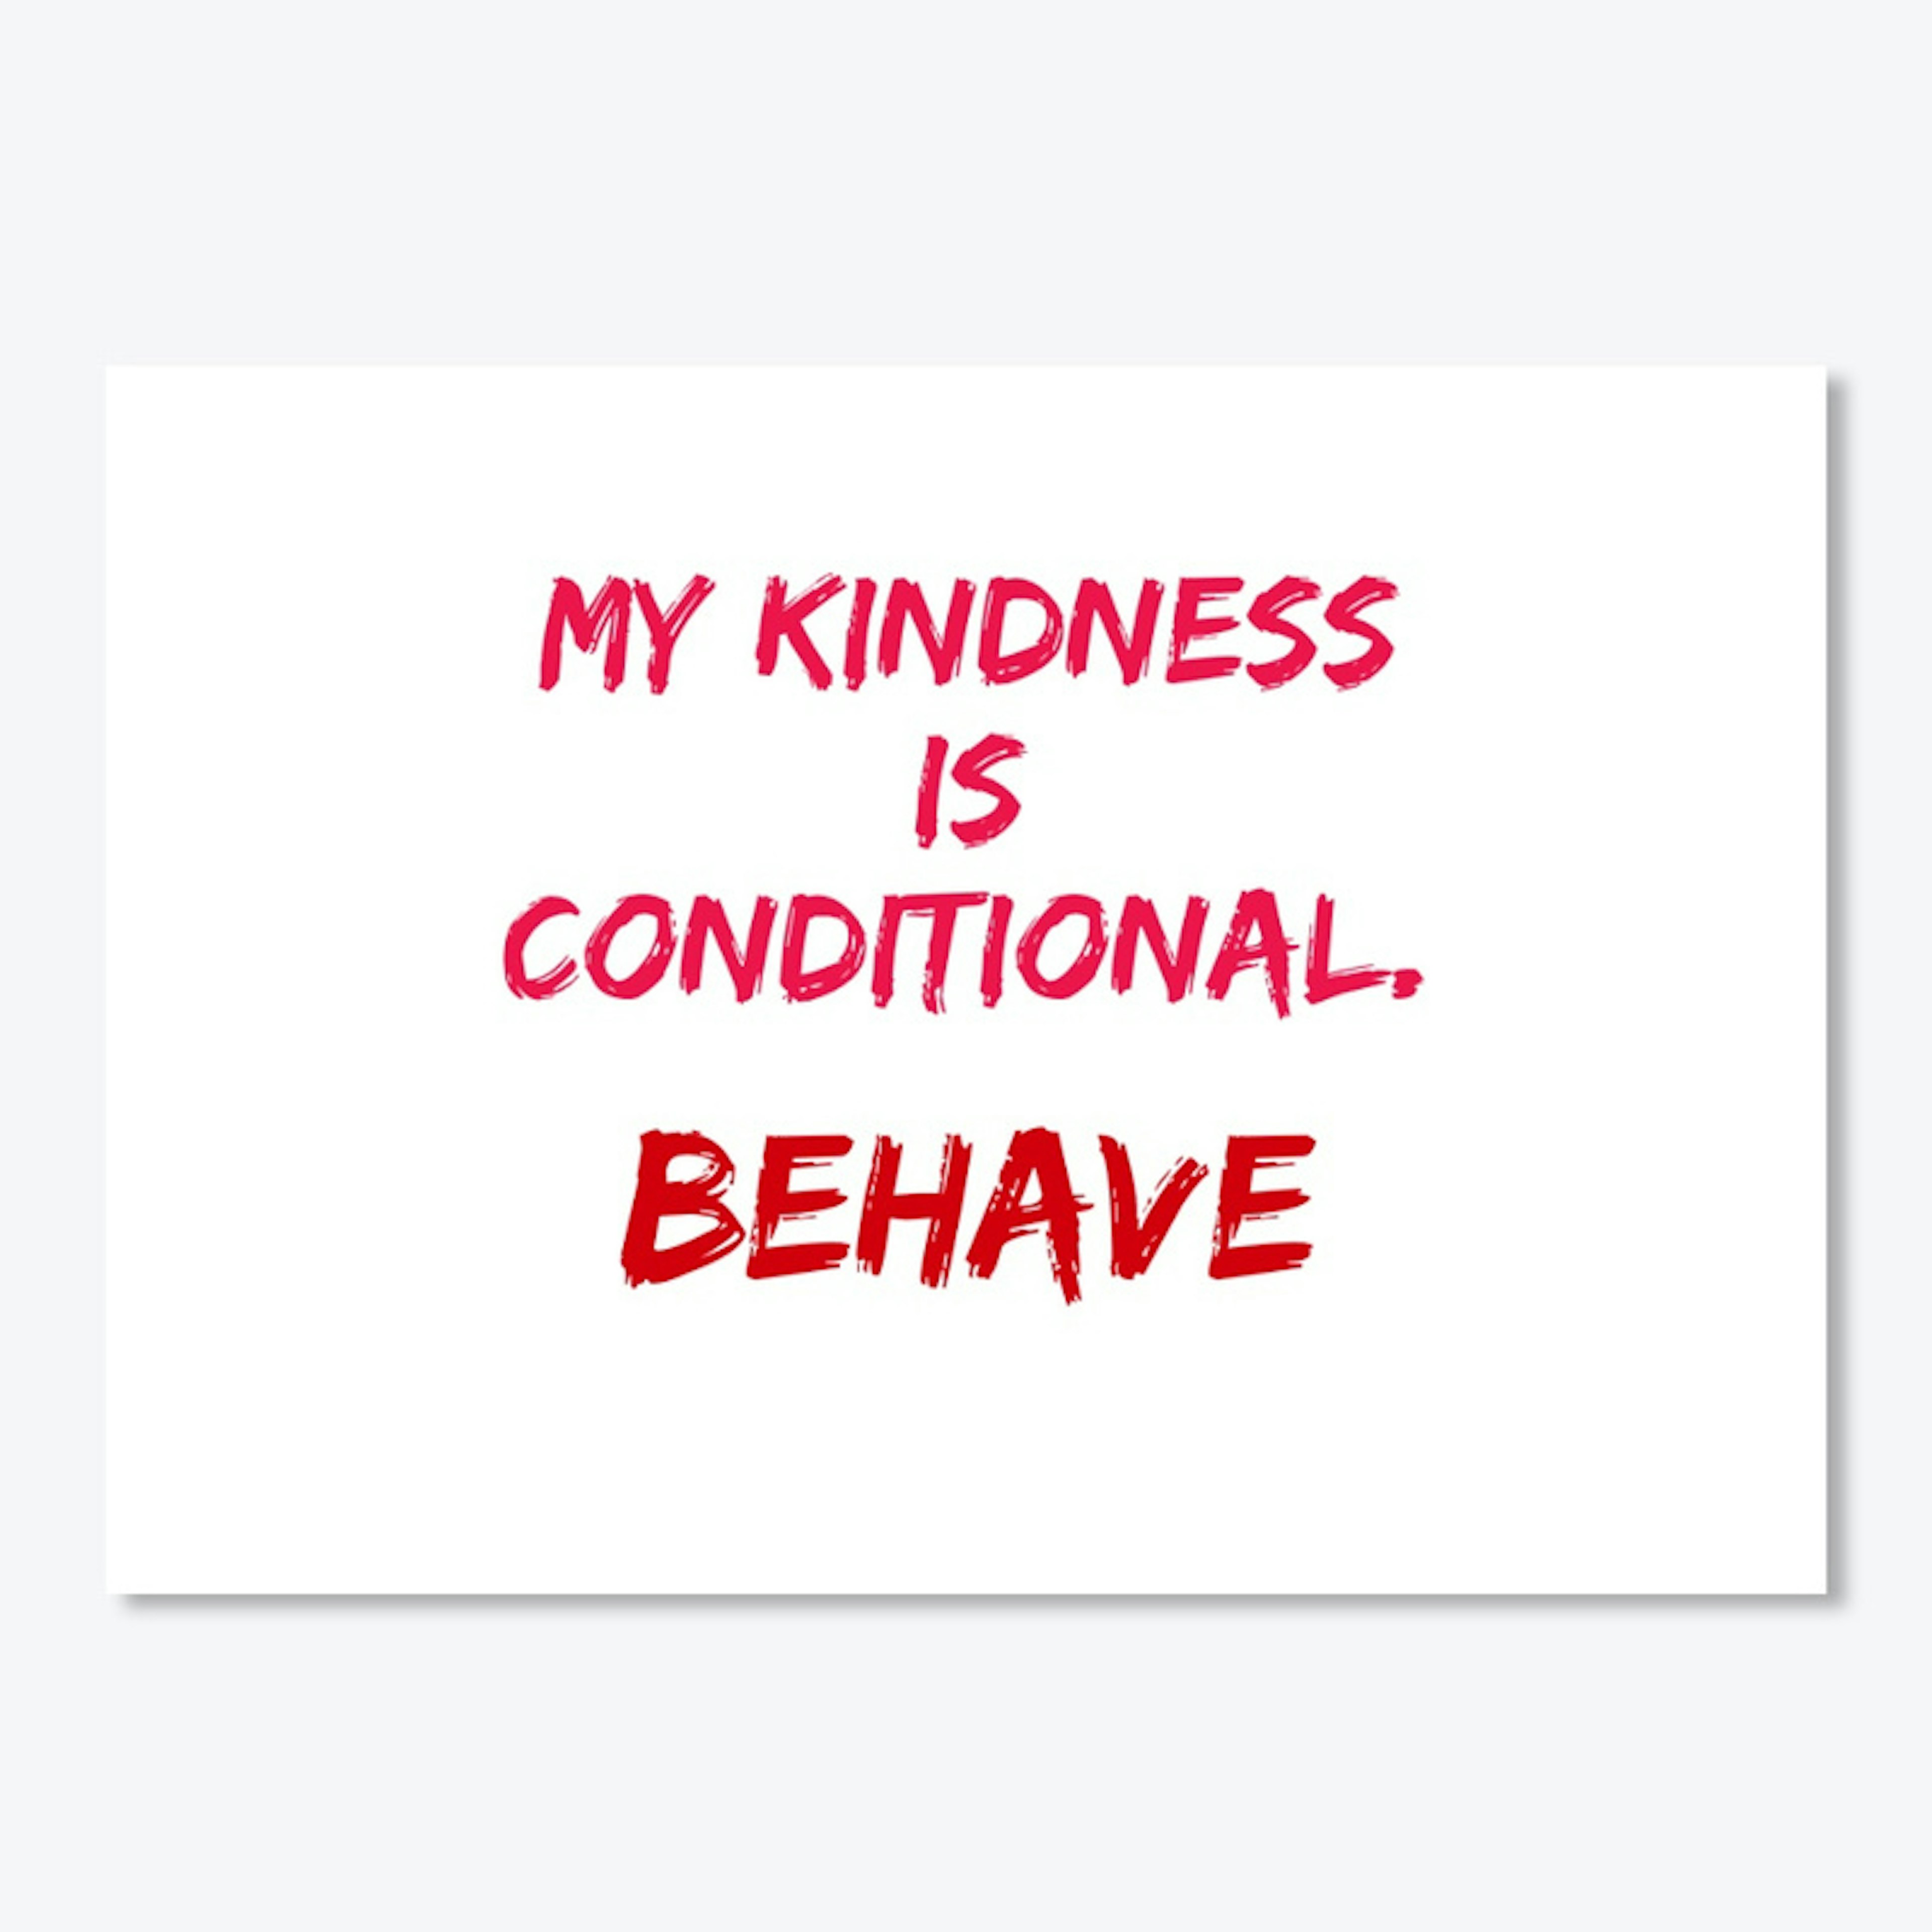 My kindness is conditional